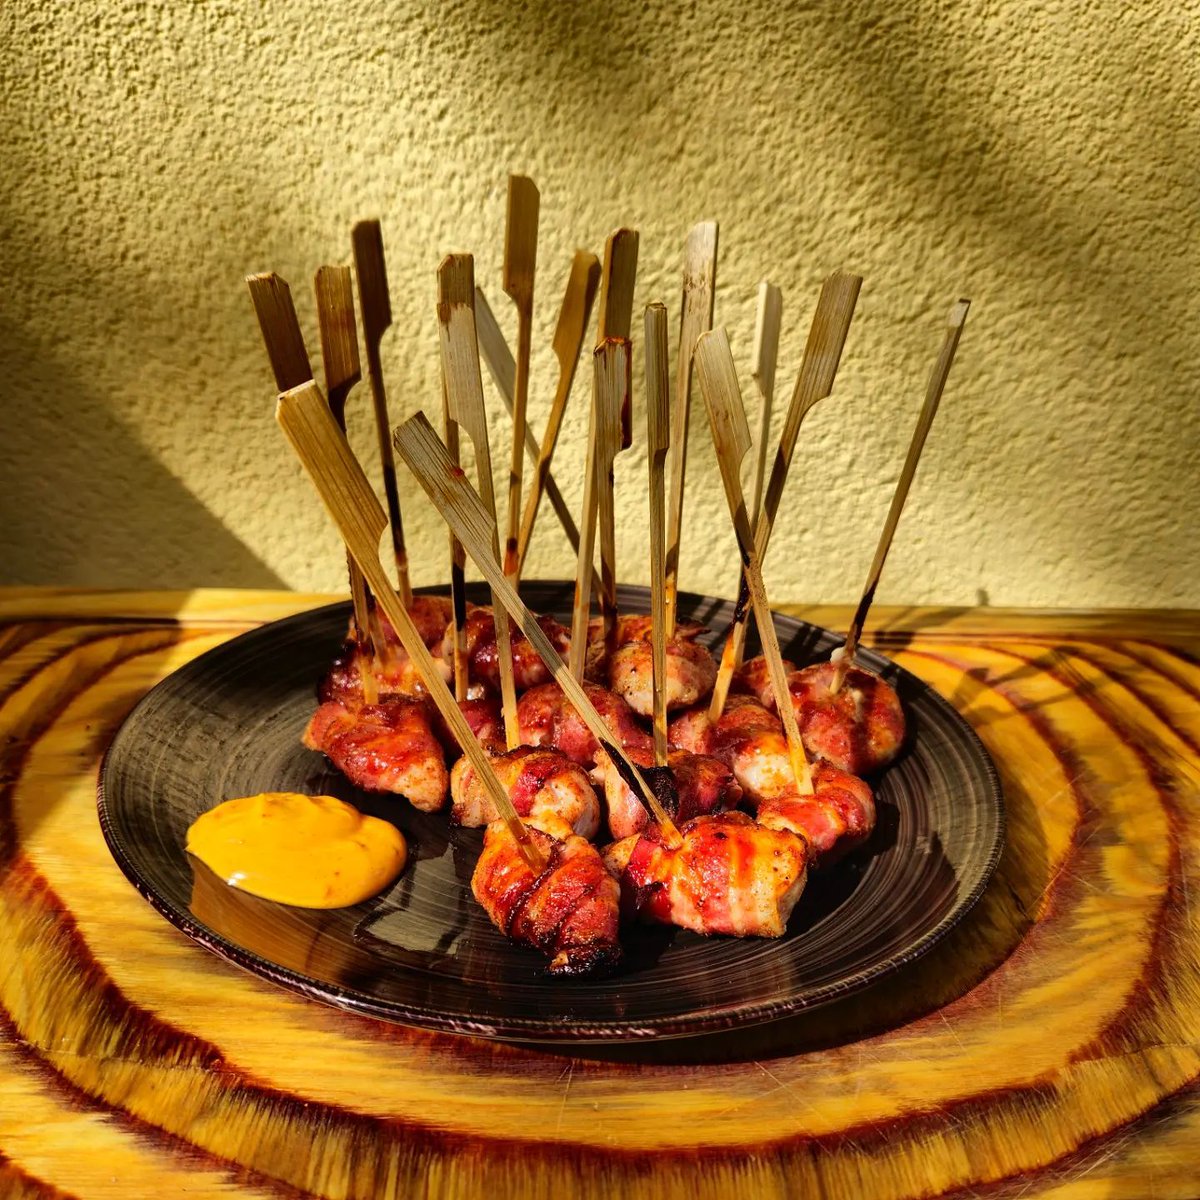 Bacon Candy Chicken Bites.🍖
#food #foodies #eat #bbq #bbqlovers #bbqtime #grill #foodphotography #foodiebeauty #yummy
#Cenhot restaurant equipment

Email: gl.zhang@cenhot.com
Whatsapp: 0086-13380500833